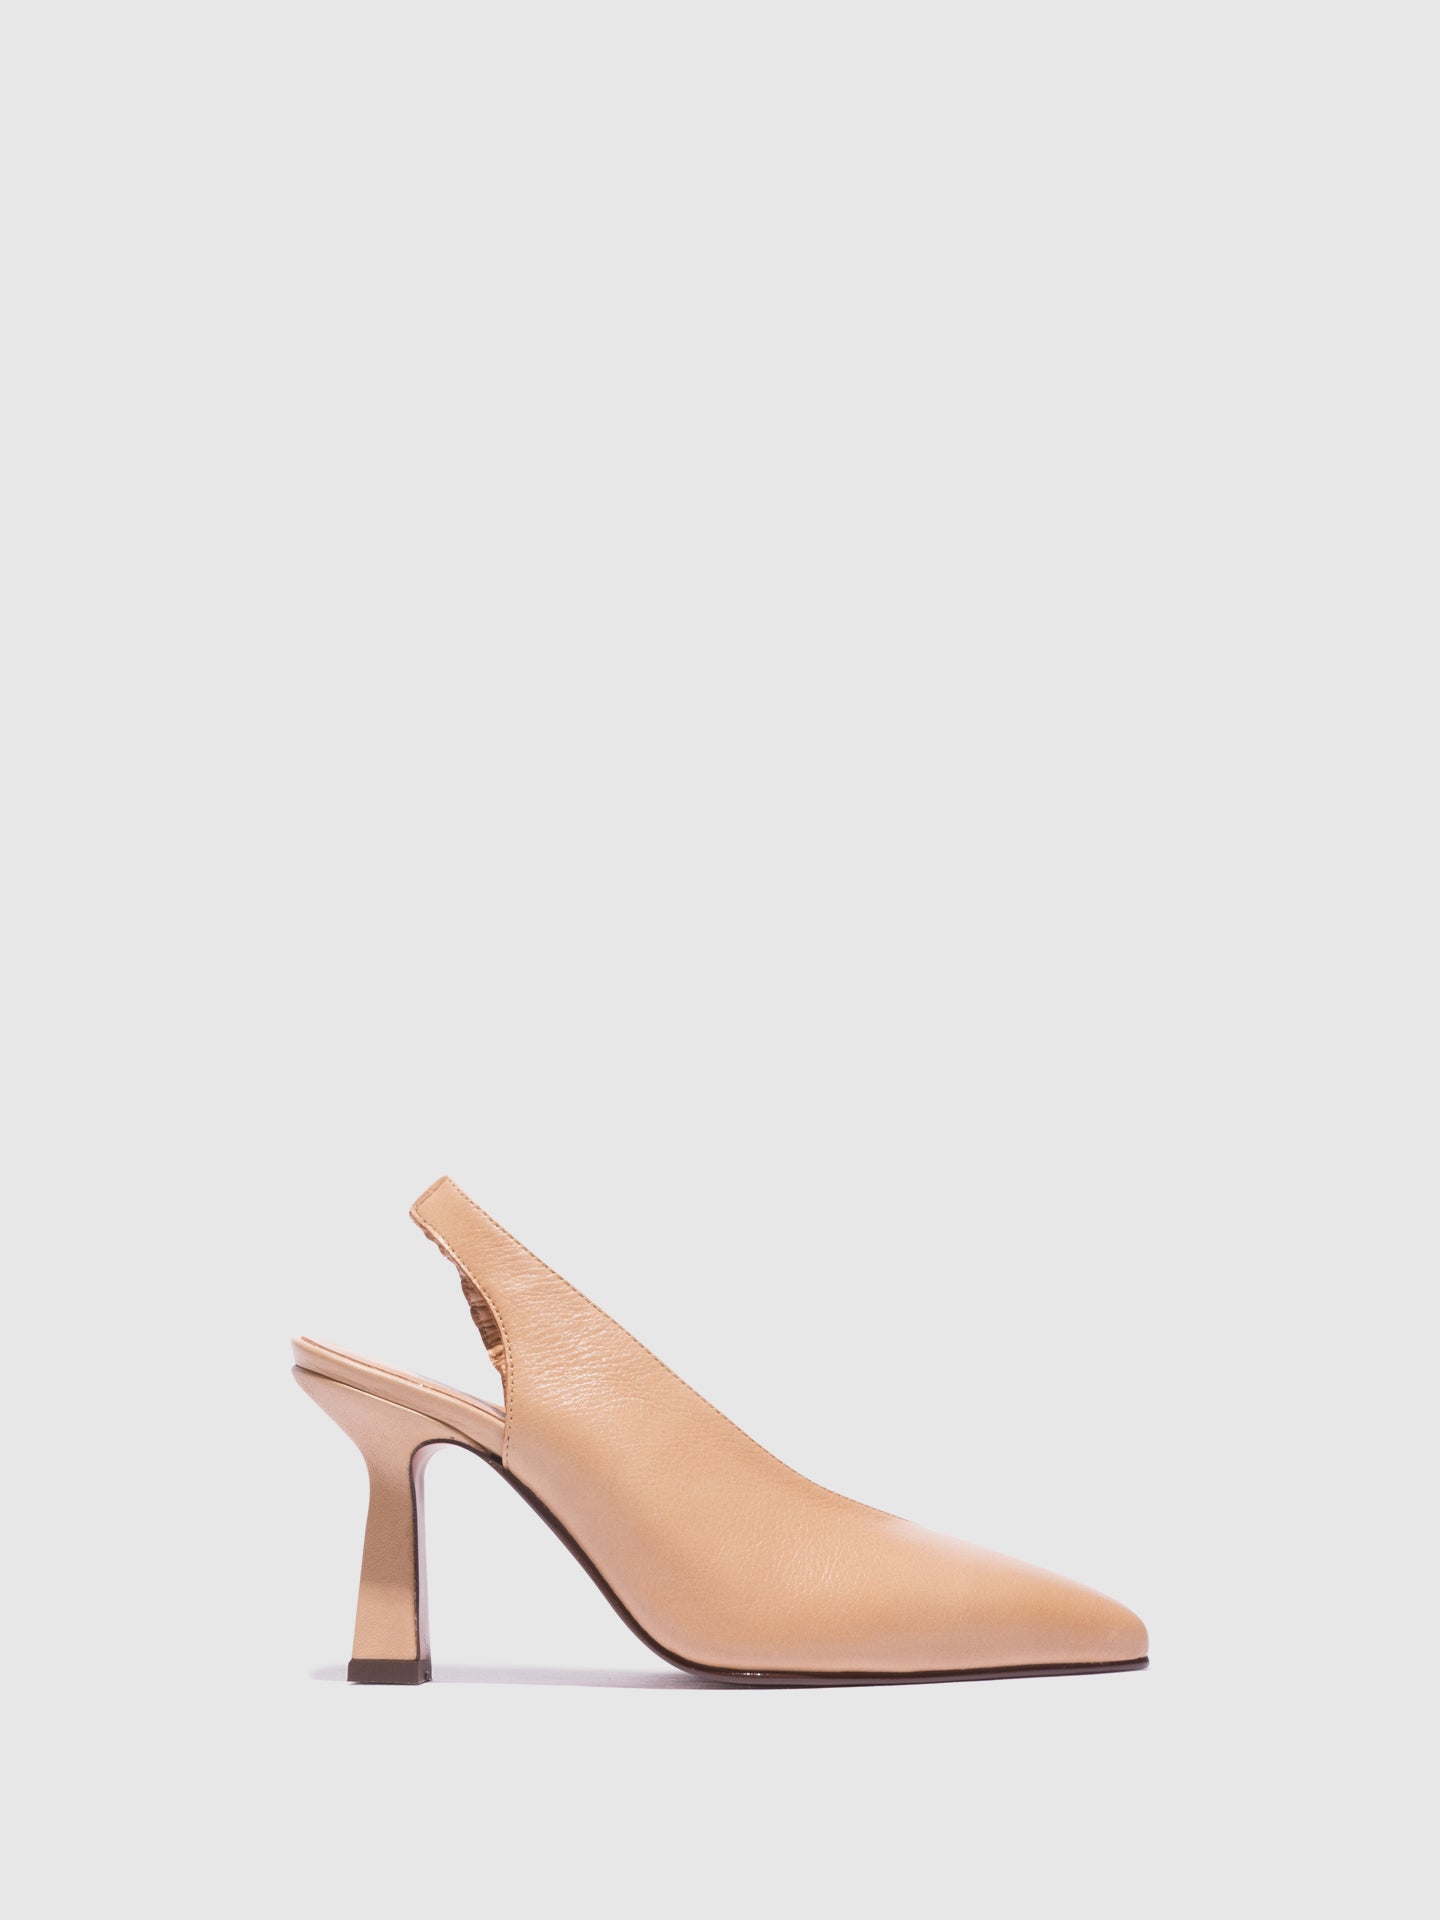 Foreva Beige Ankle Strap Shoes